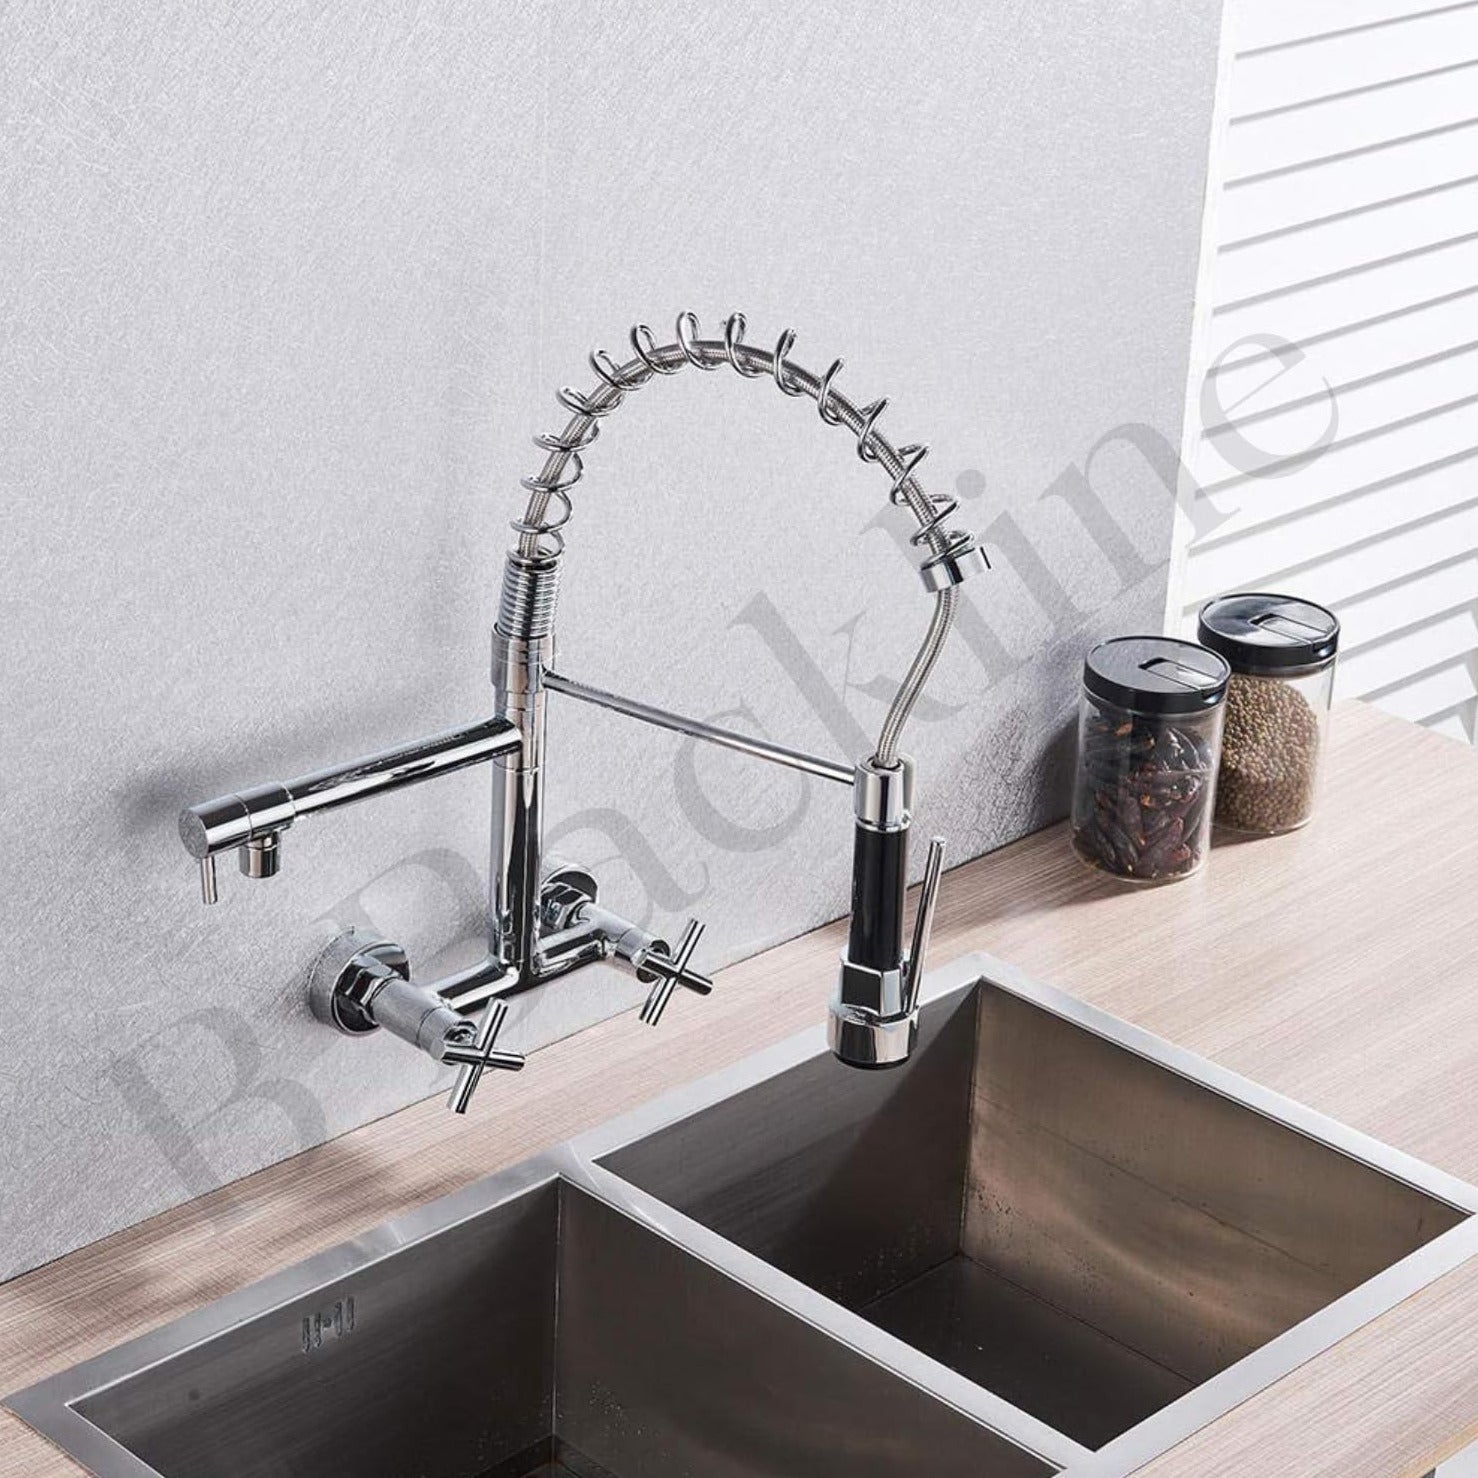 B Backline Brass Wall-Mount Sink Tap Hot & Cold Mixer Pullout Kitchen Faucet(Silver)